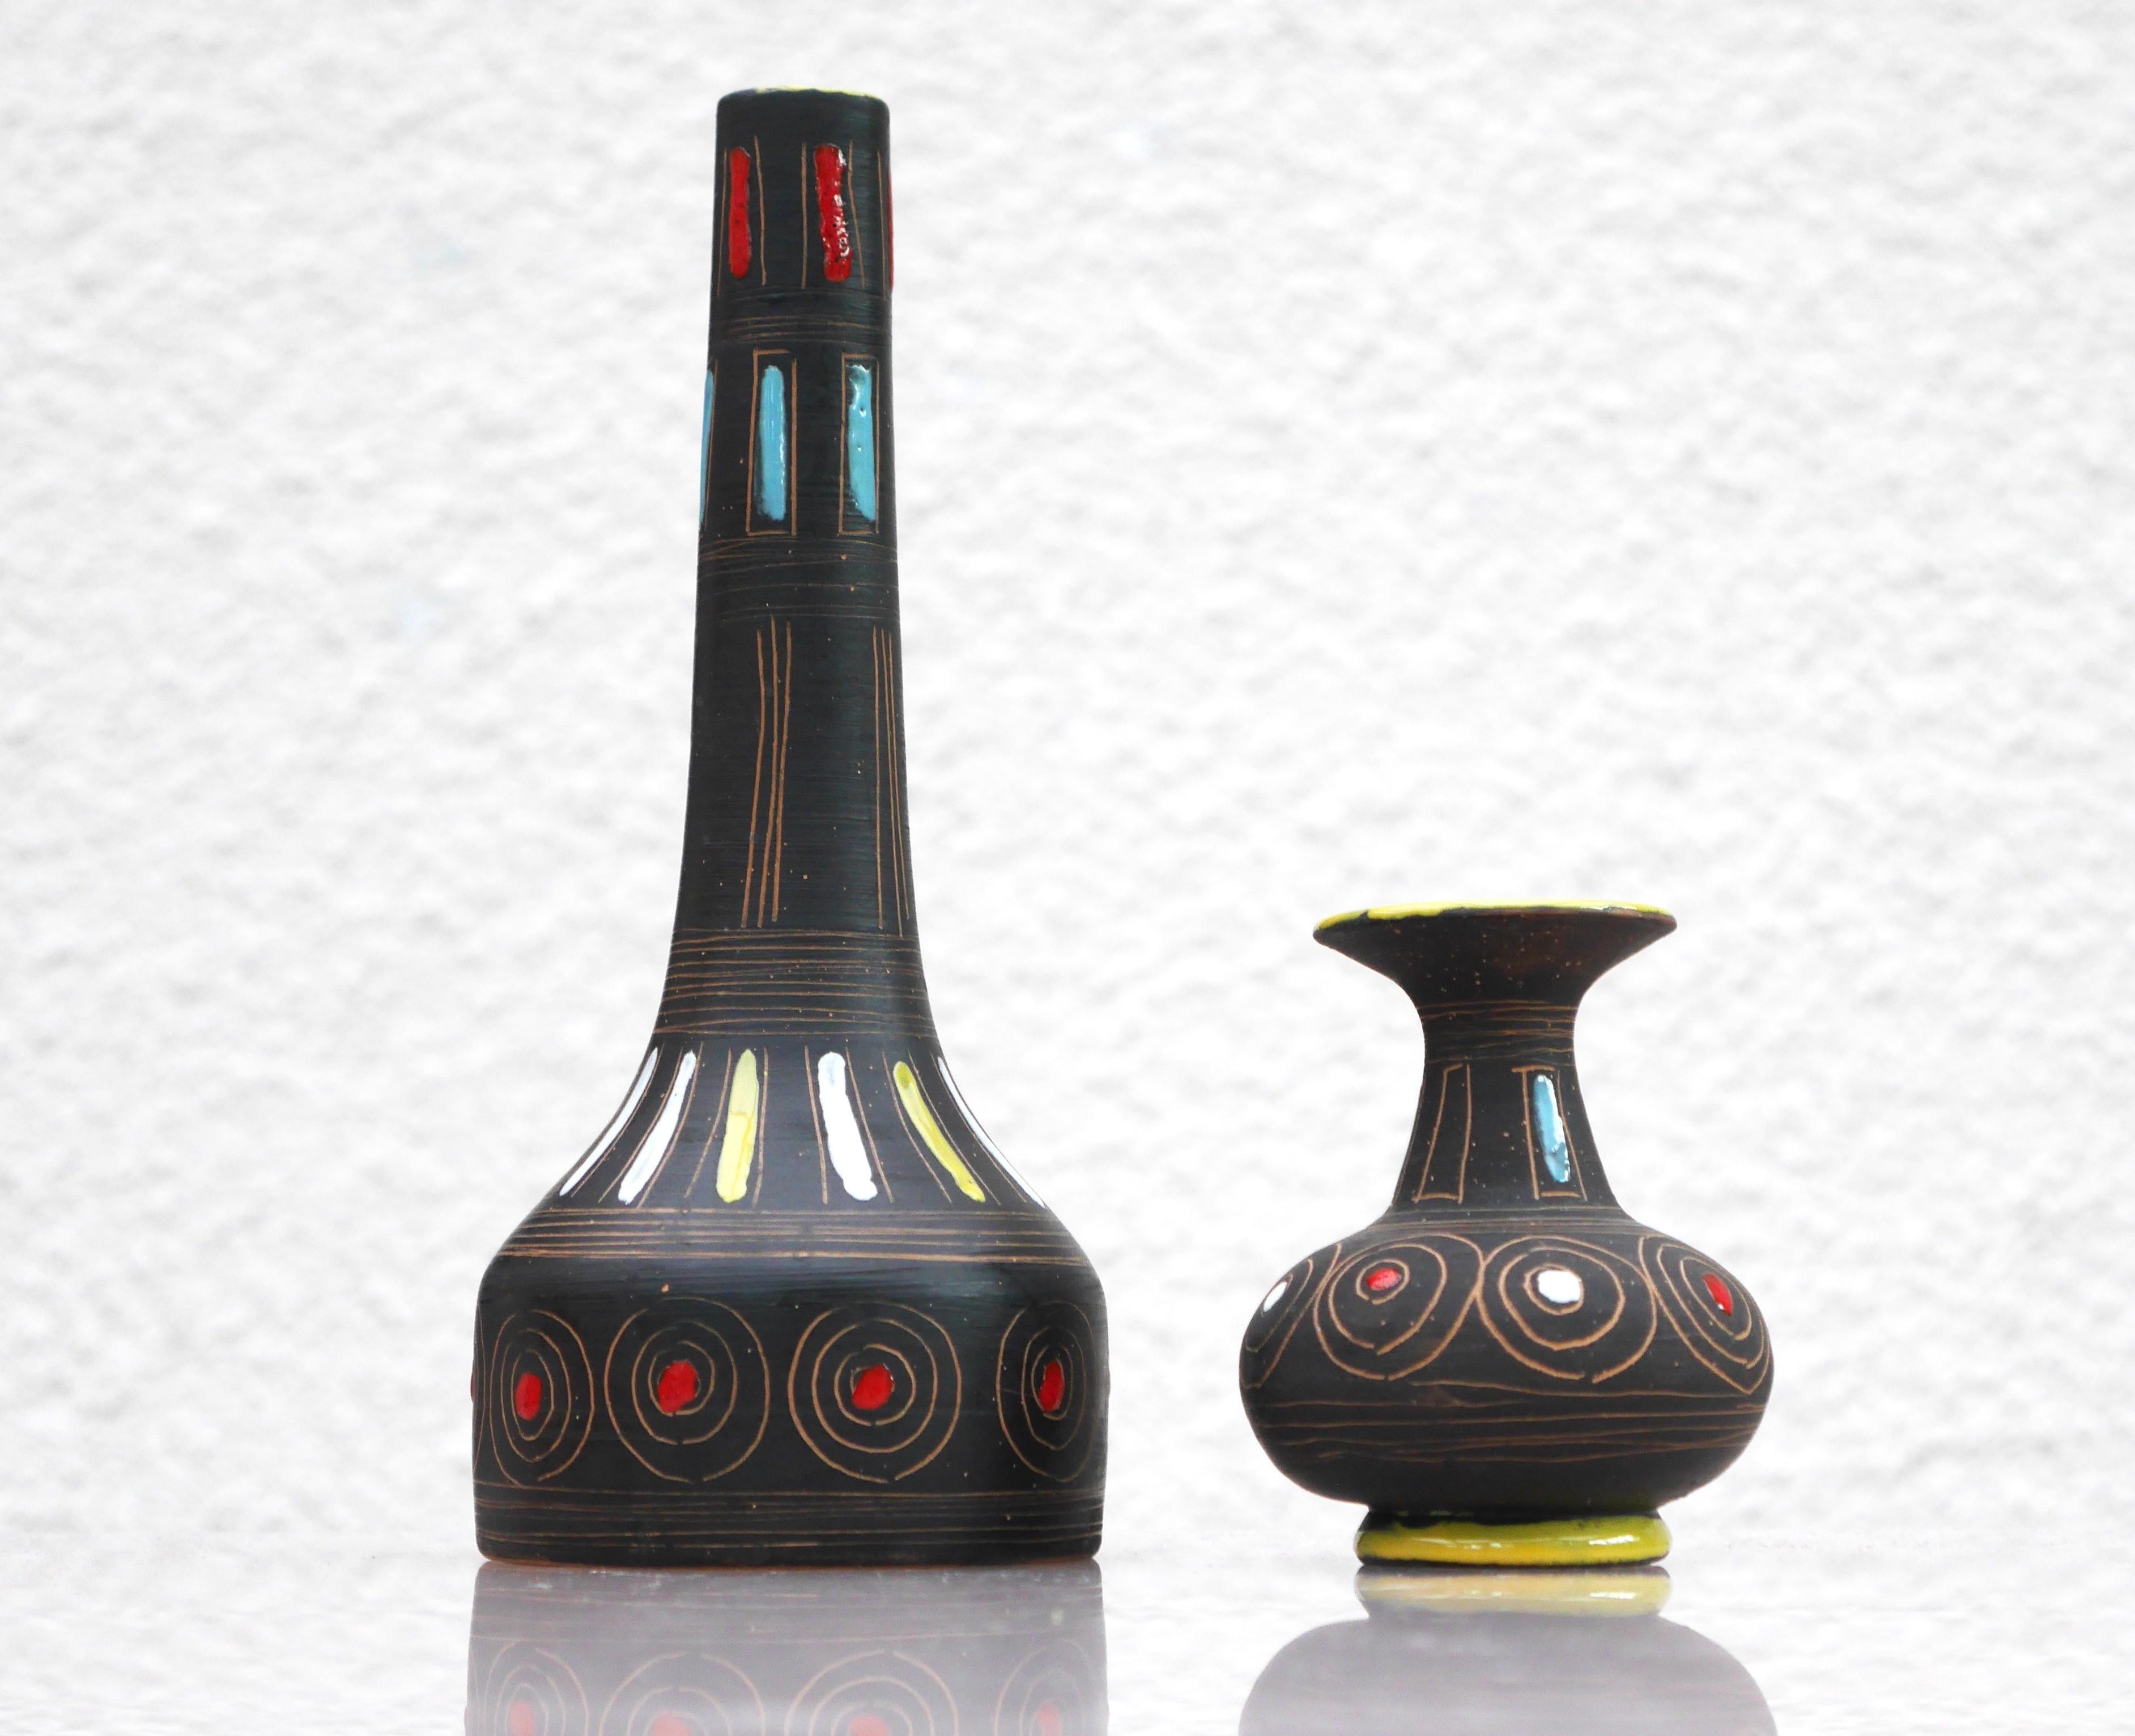 Ceramic A pair of Mid-century modern pottery vases, by Fratelli Fanciullacci , Italy.